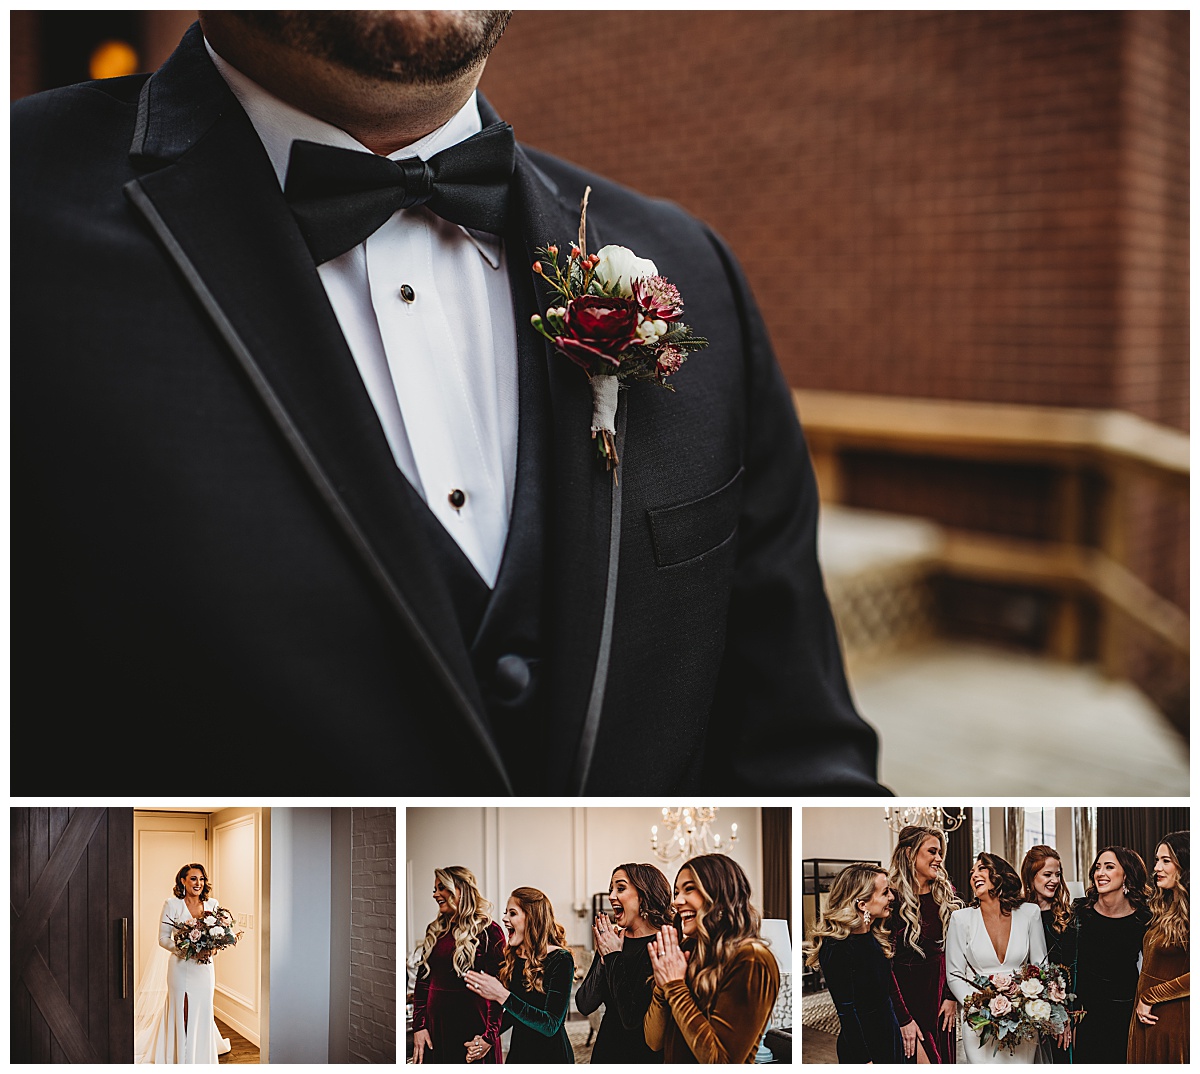 Bridal party's first look at the bride for a moody winter wedding in Baltimore by Brittany Dunbar Photography, a Baltimore Wedding Photographer.